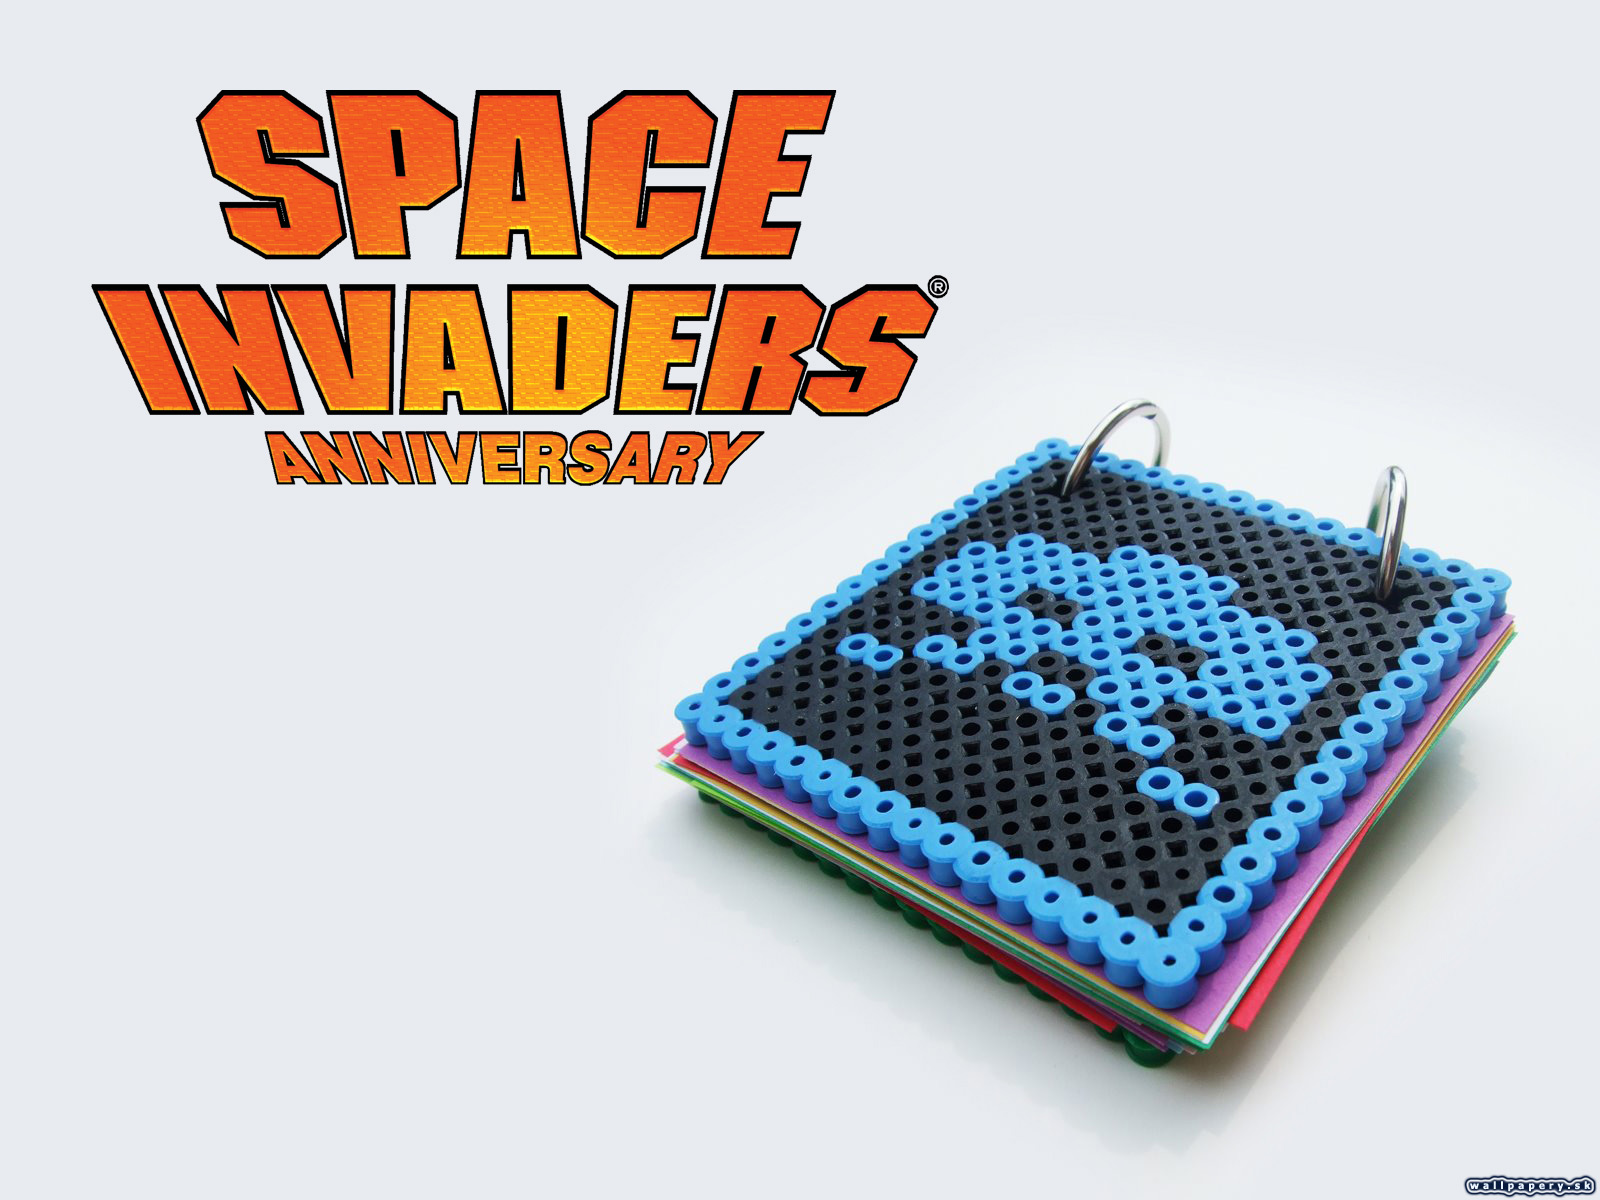 Space Invaders Anniversary - wallpaper 5